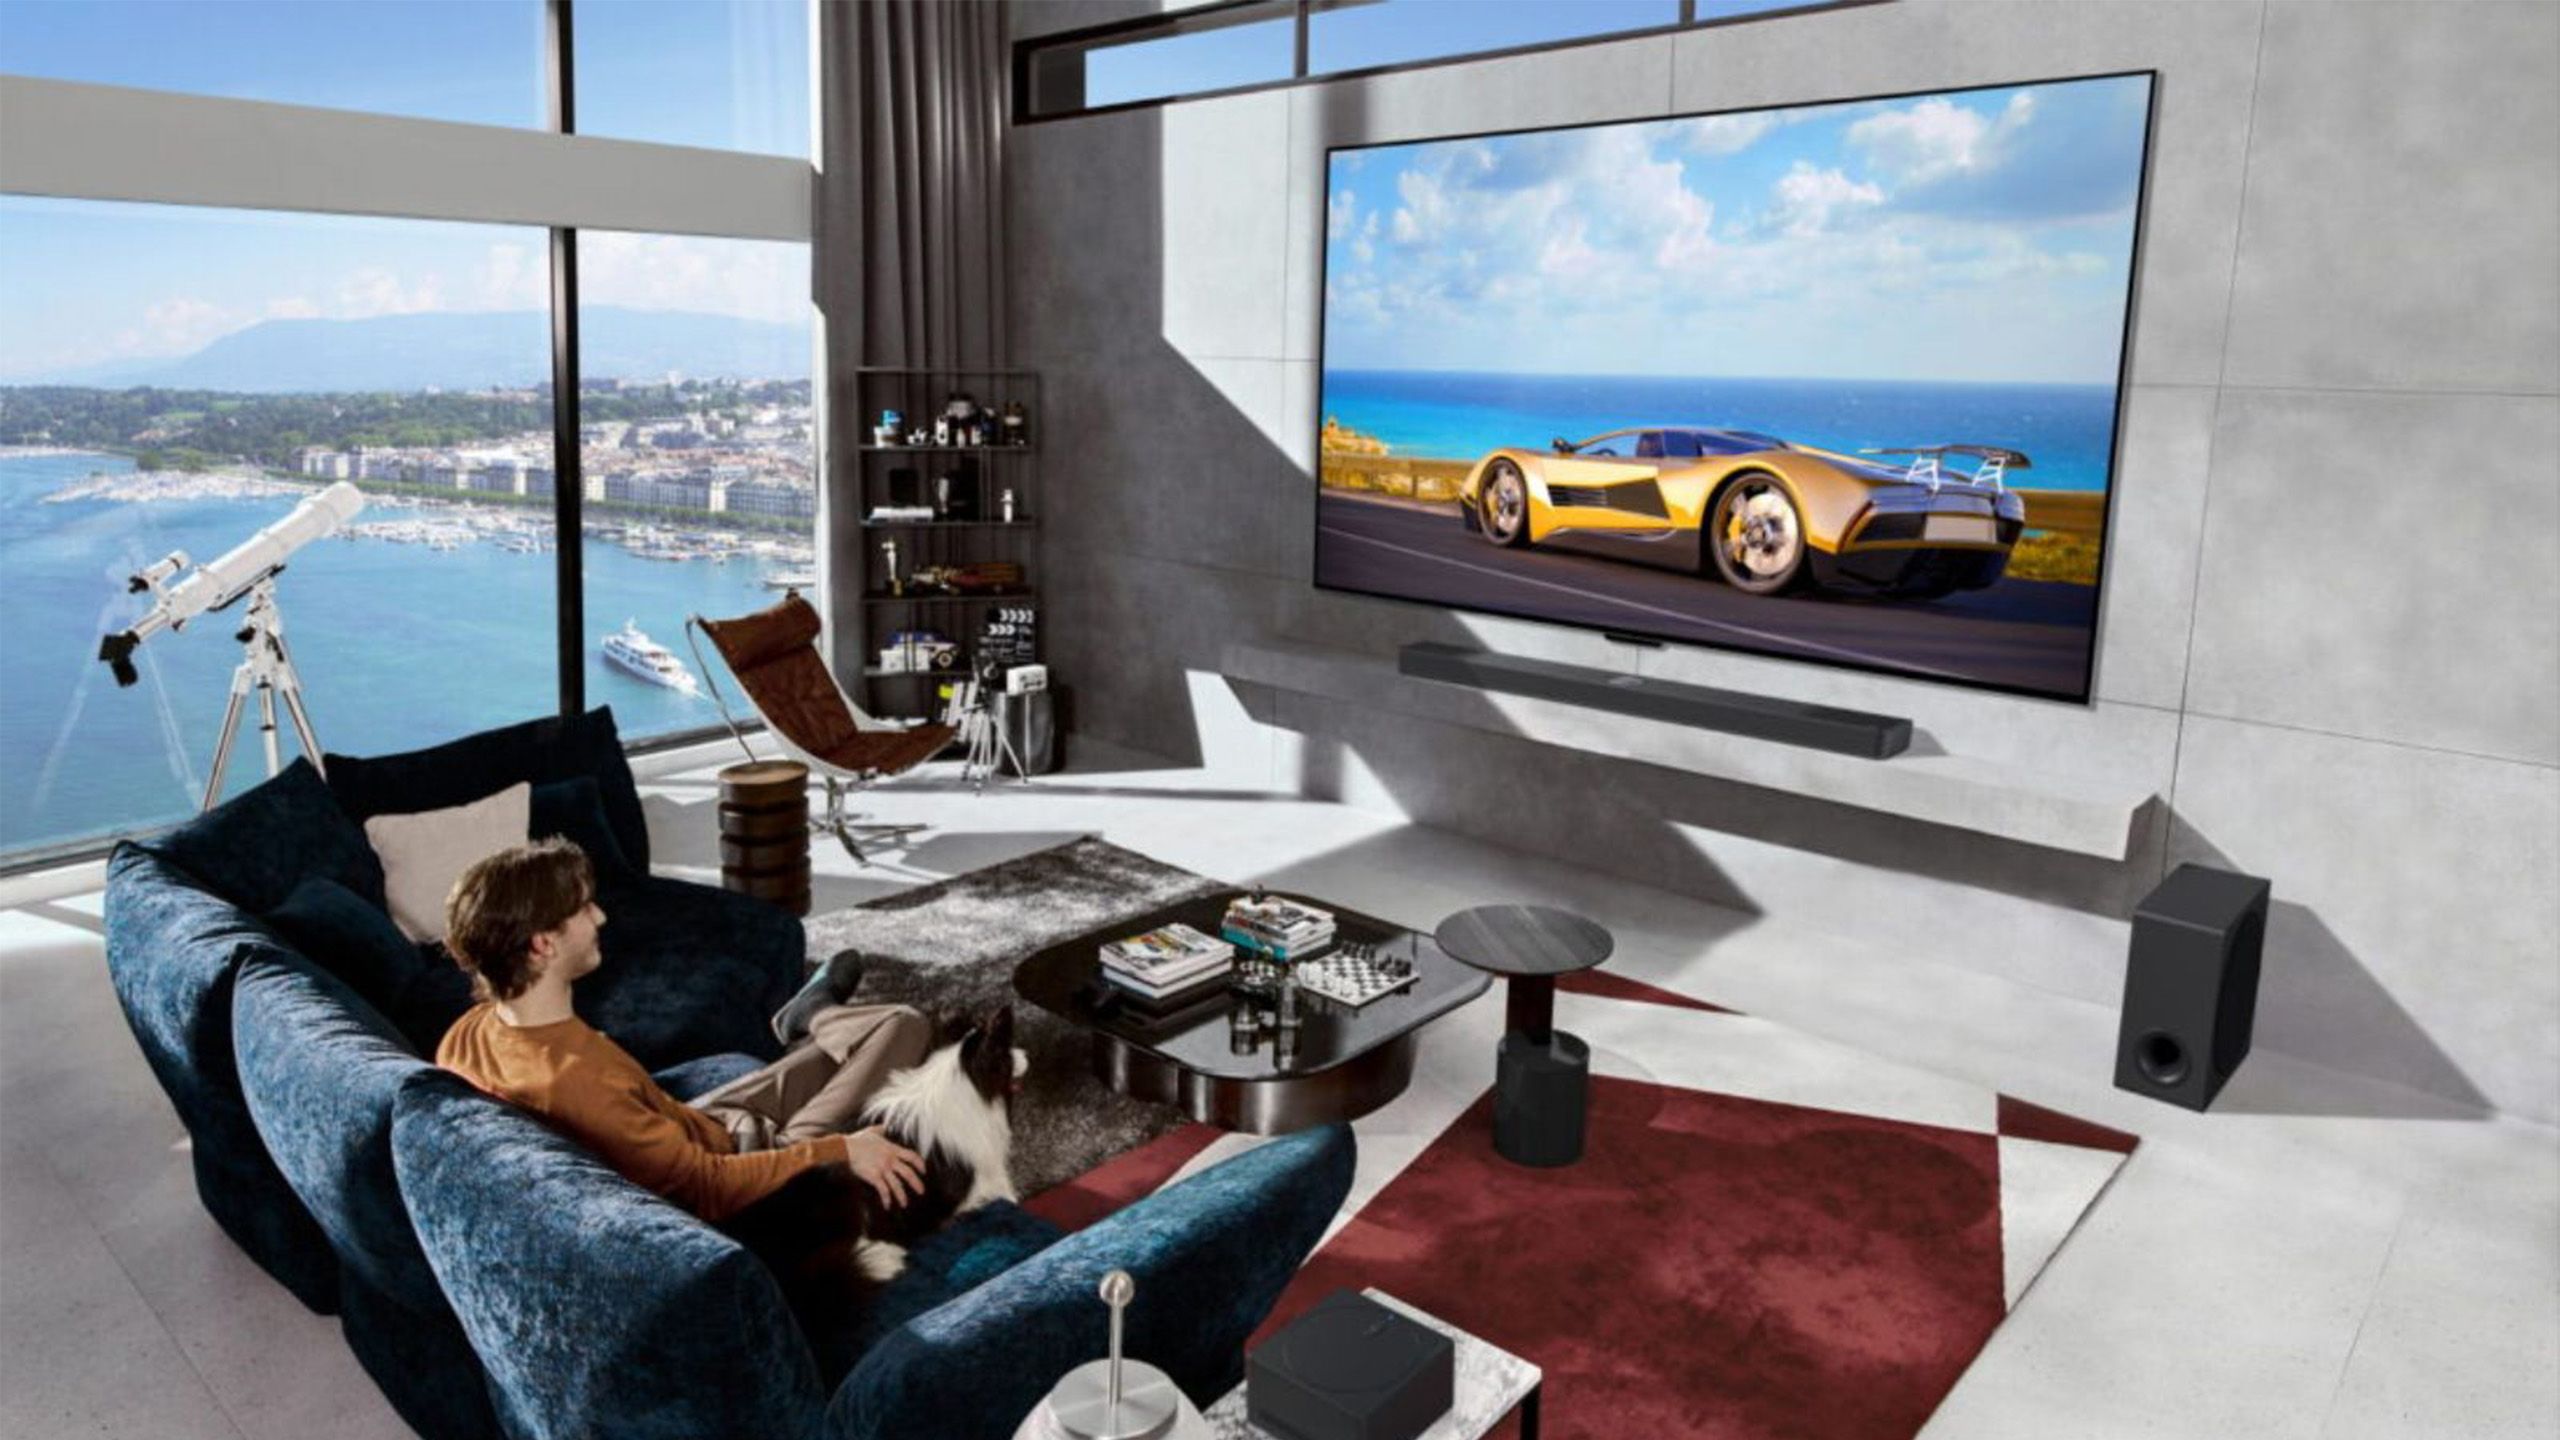 Hisense unveils full Mini-LED lineup at CES, including 110-inch ULED X TV